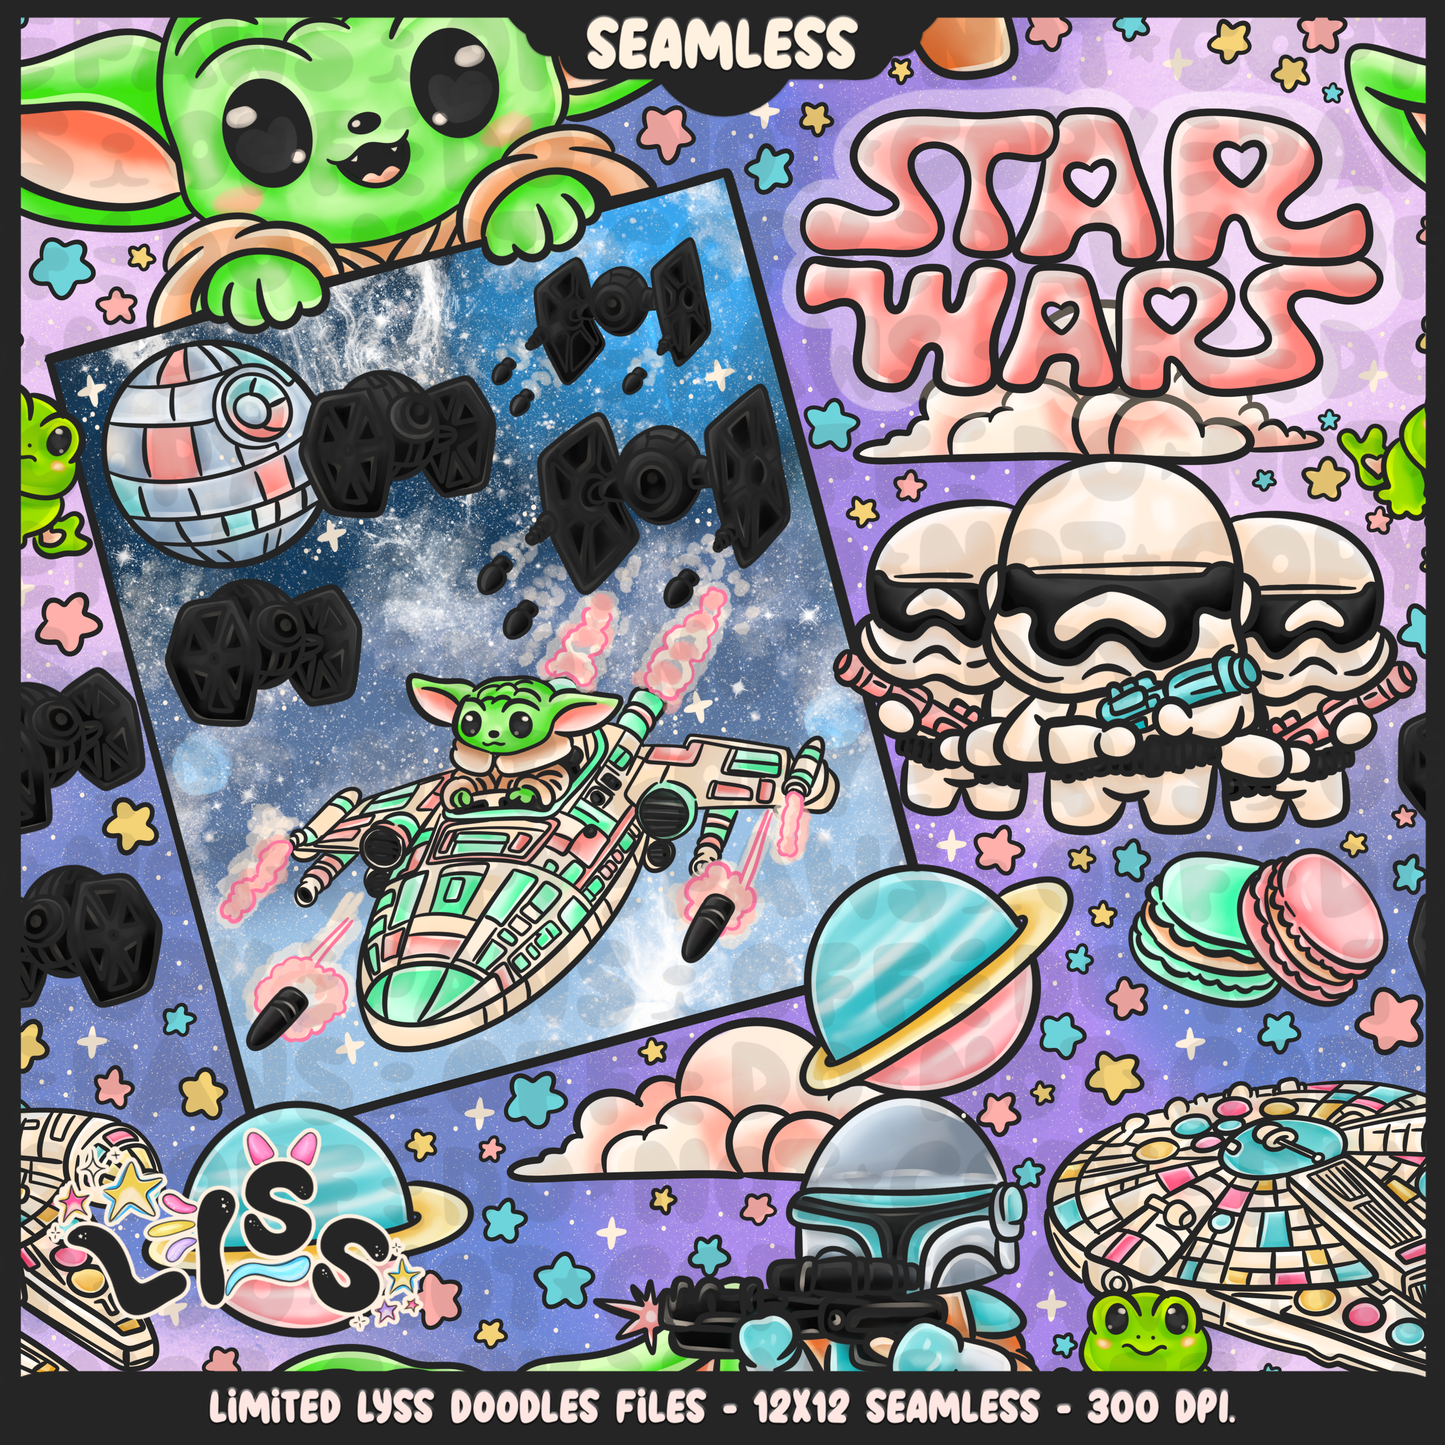 2024 - Lyss Doodles - Seamless - Mains - May Fourth Event - Space Battle - 24LD043